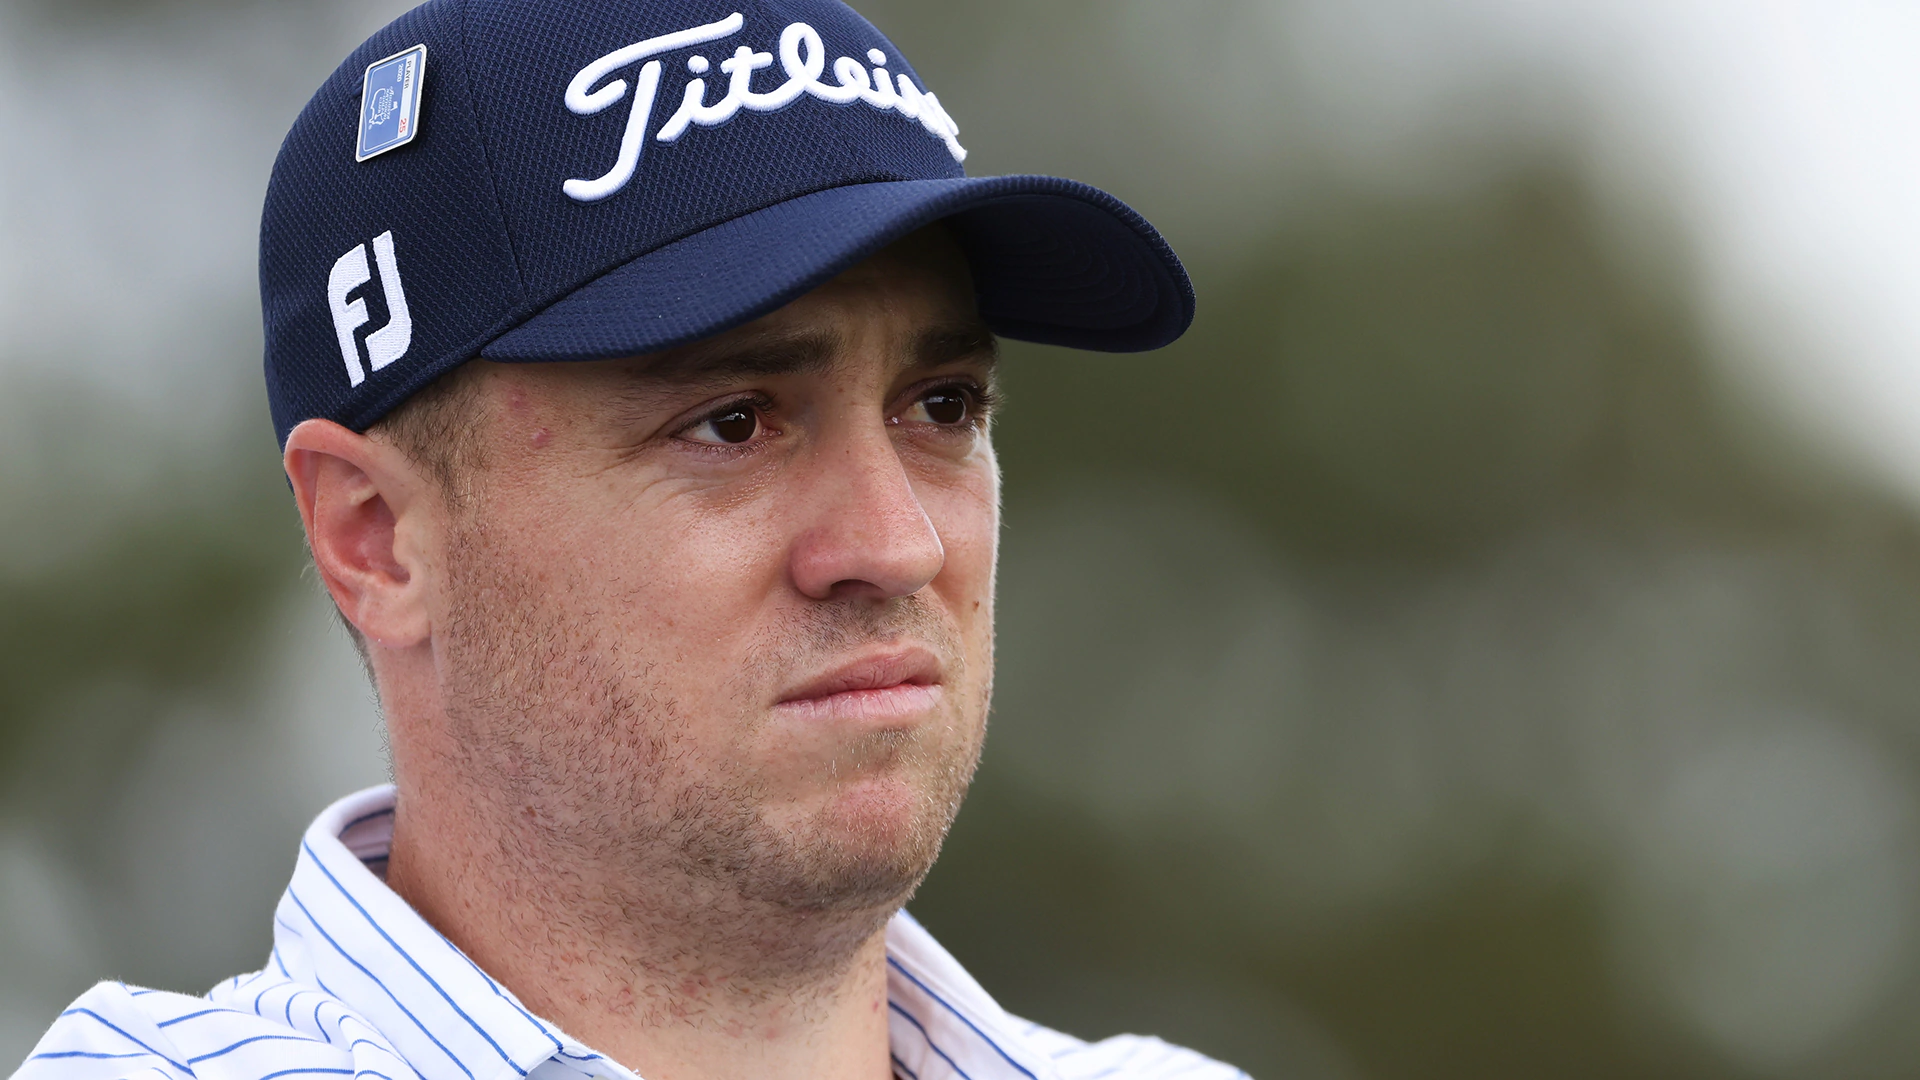 Justin Thomas: I don’t need to get ‘huge’ to win tournaments